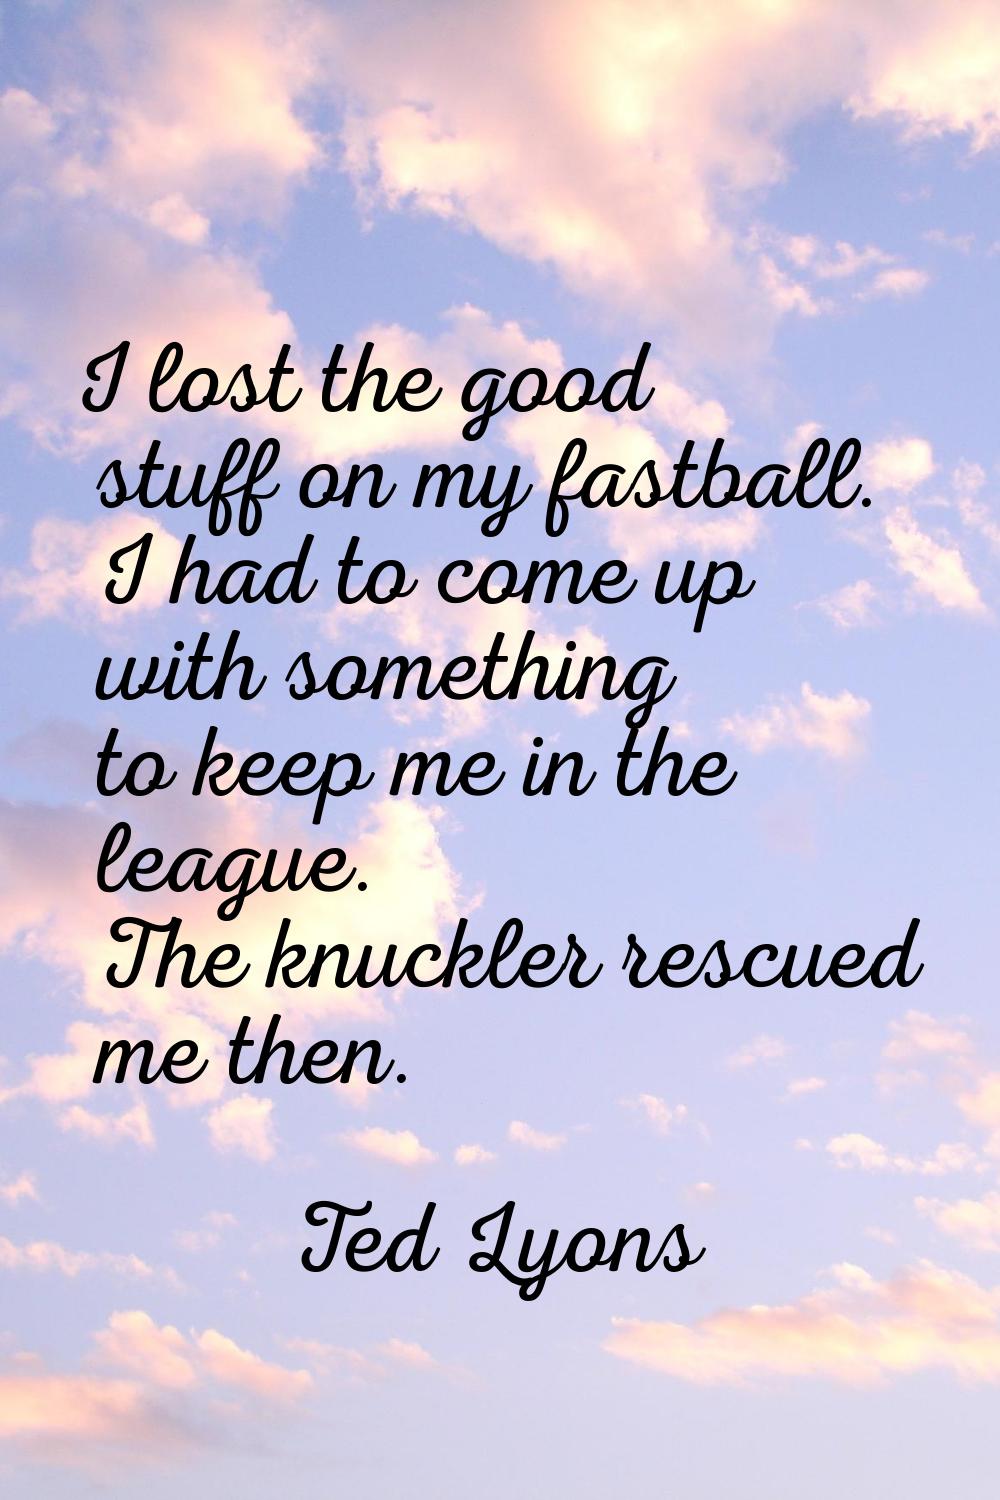 I lost the good stuff on my fastball. I had to come up with something to keep me in the league. The